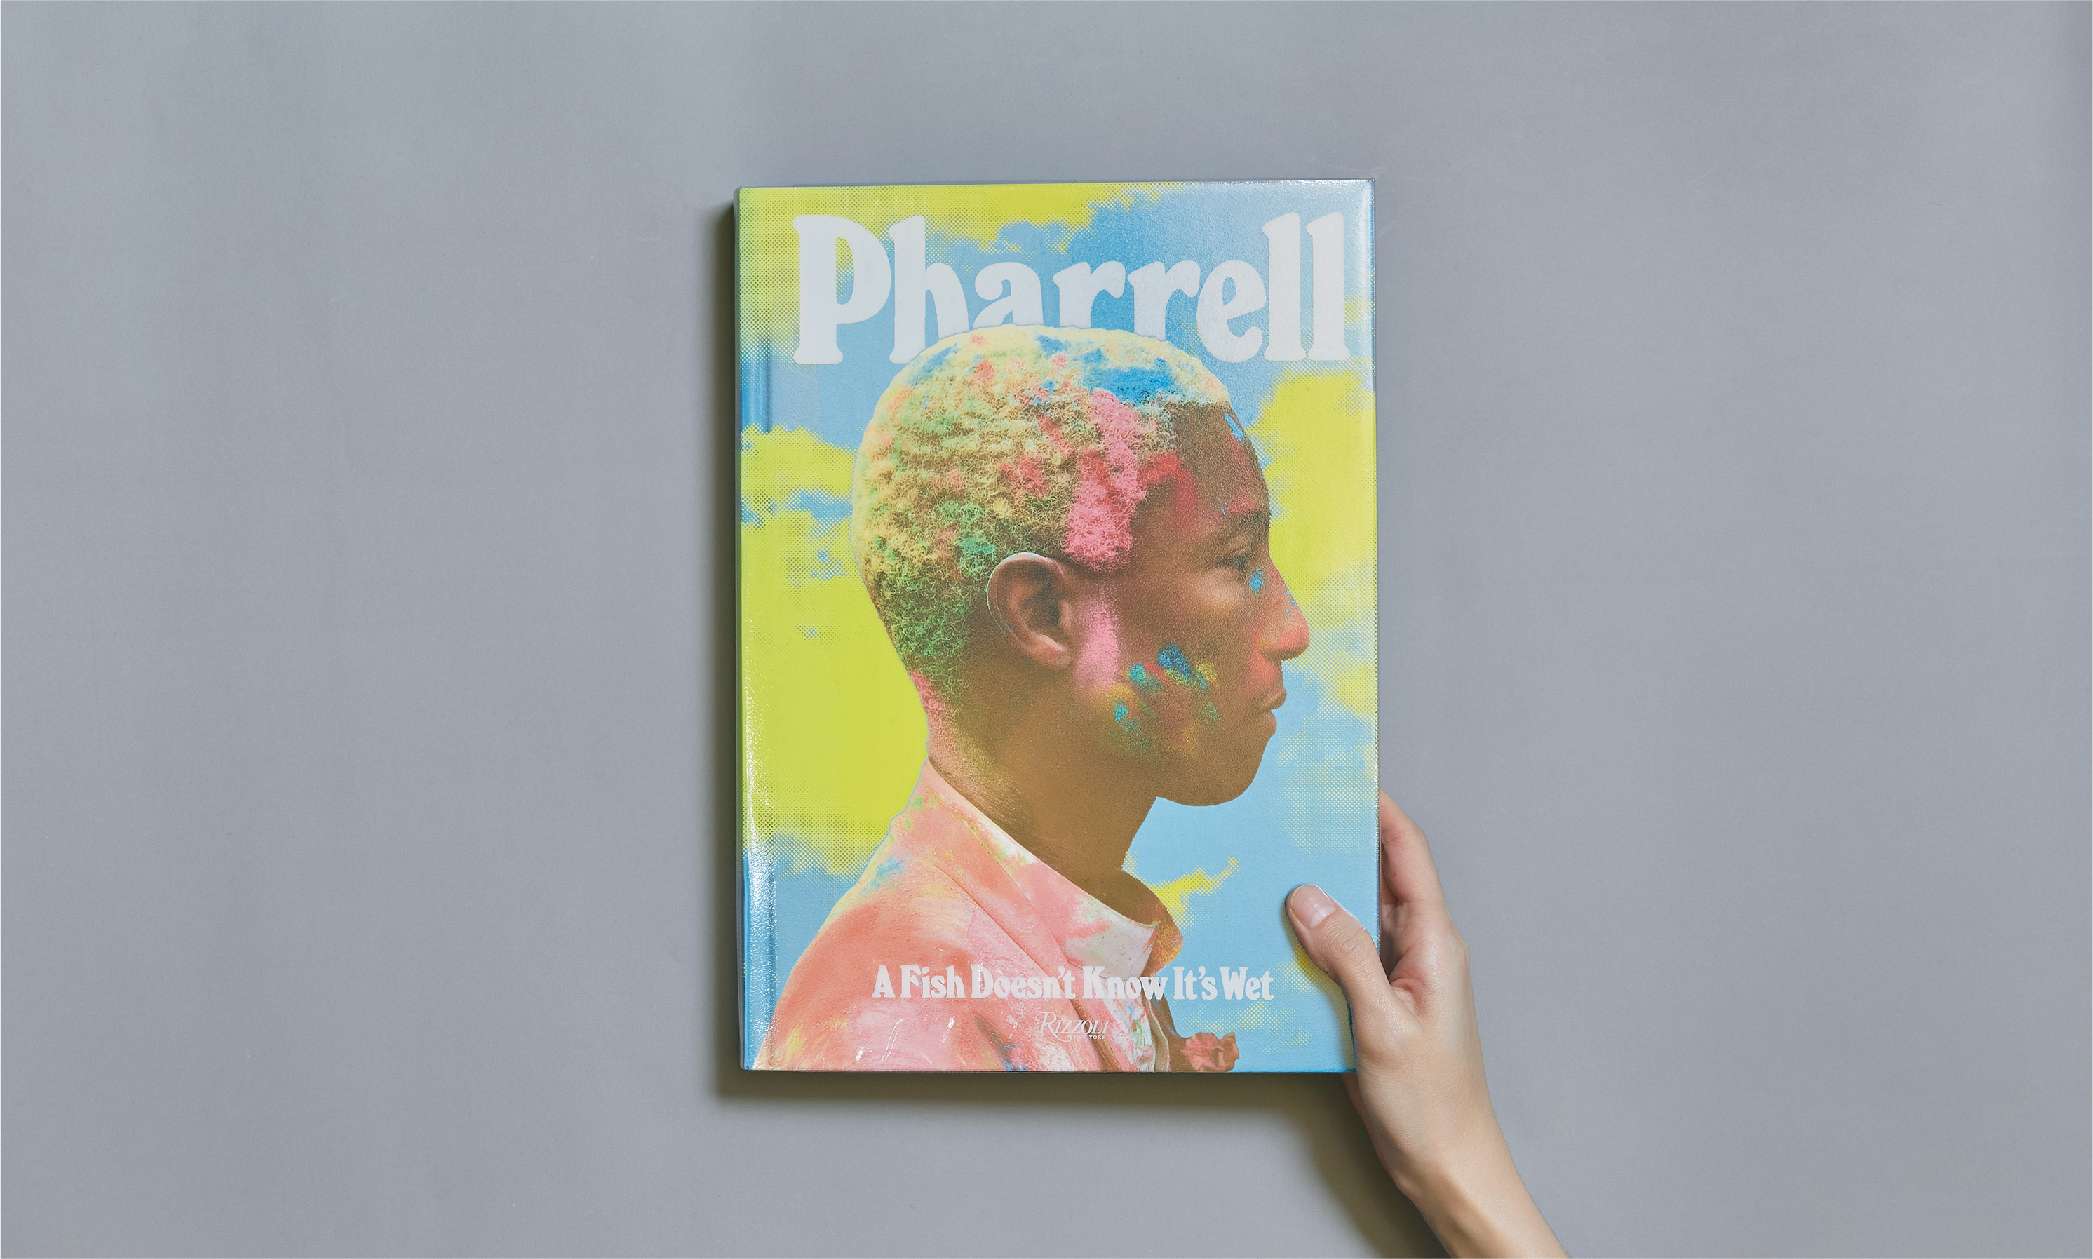 Pharrell: A Fish Doesn’t Know It’s Wet